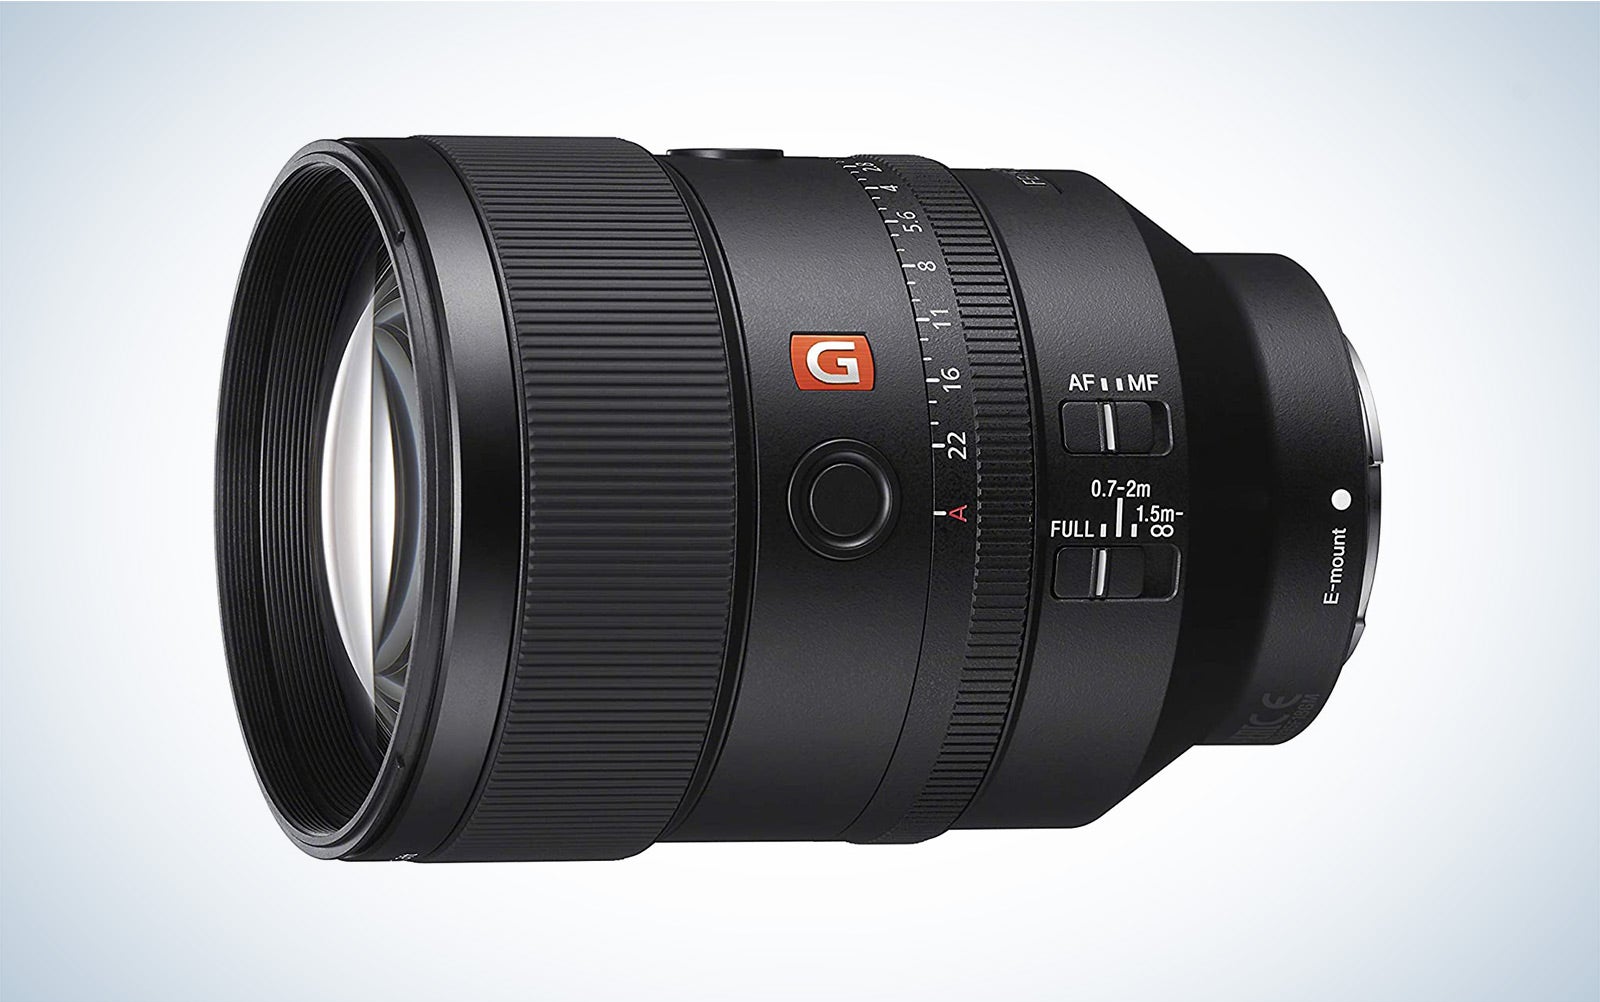 The Sony 135mm f/1.8 G Master lens is the best telephoto portrait lens for Sony.